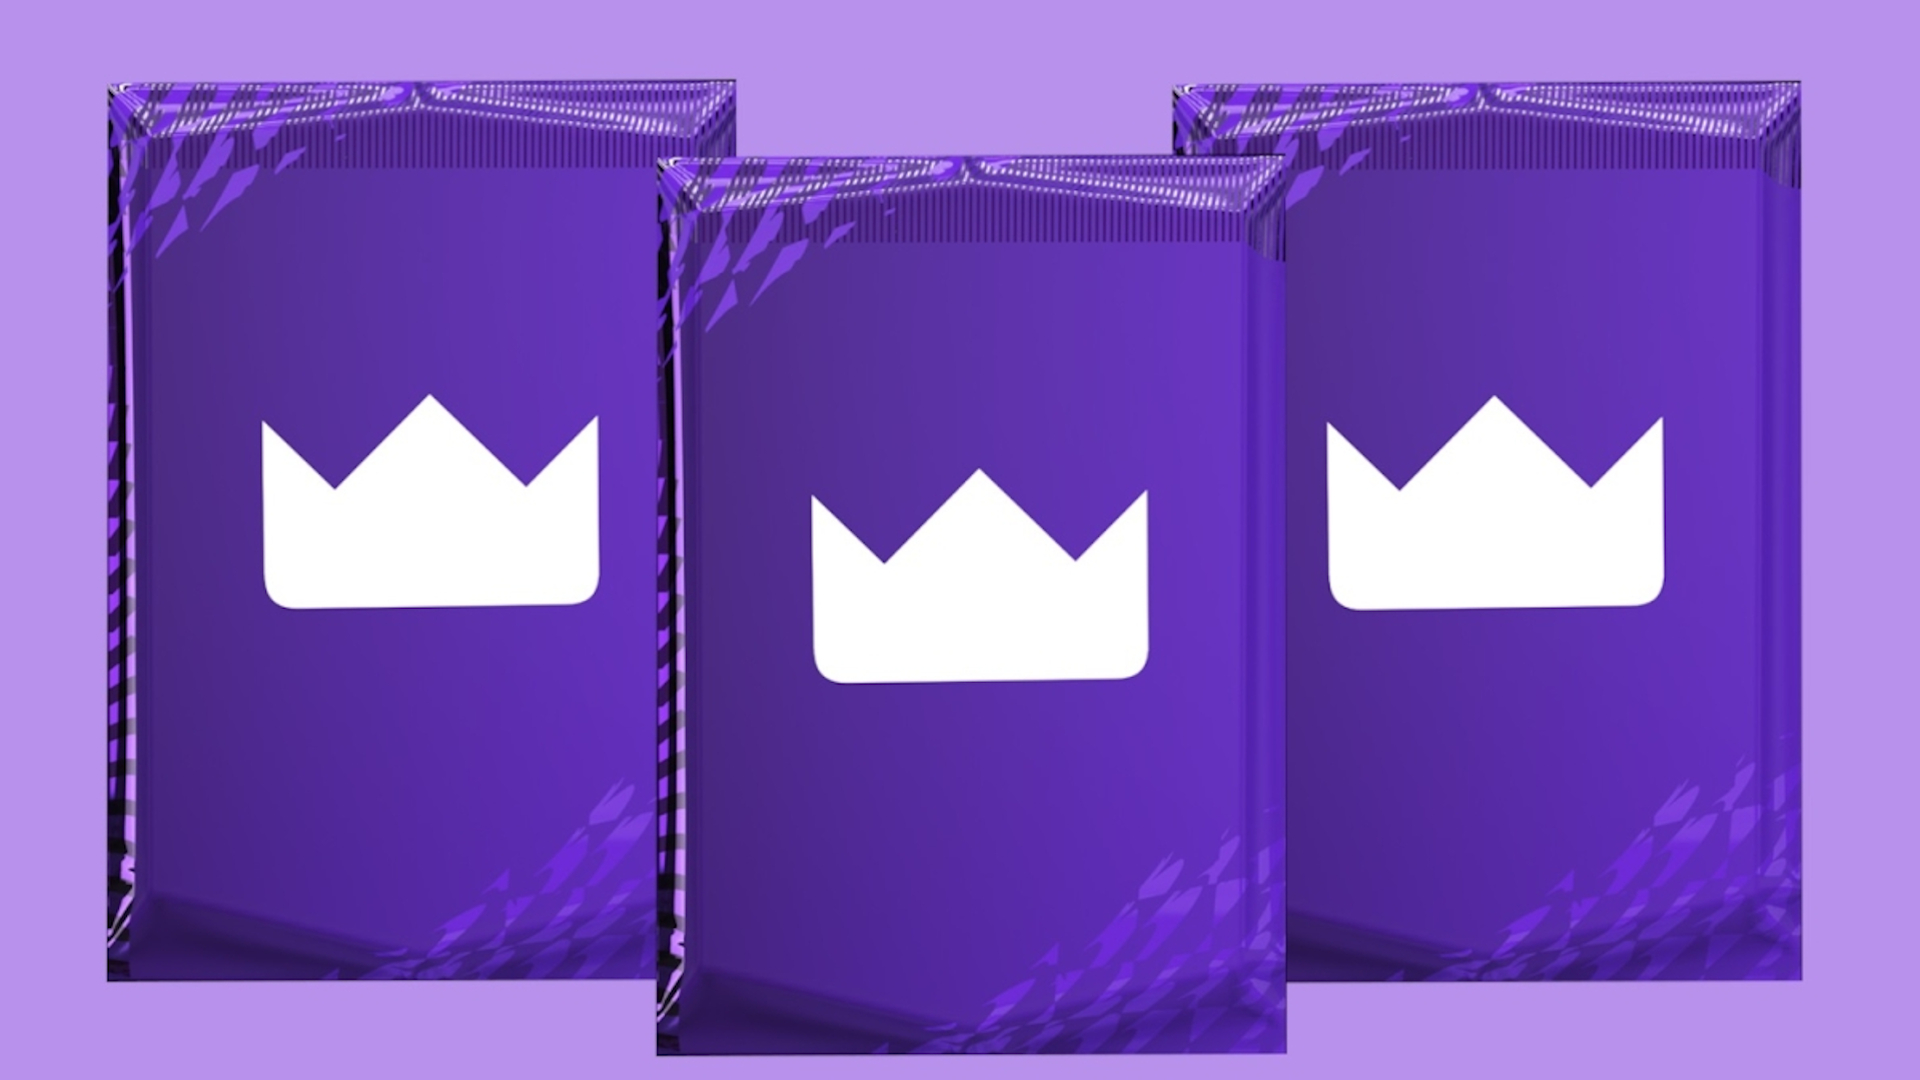 Prime Gaming - A Golden Loot Box awaits #TwitchPrime members in